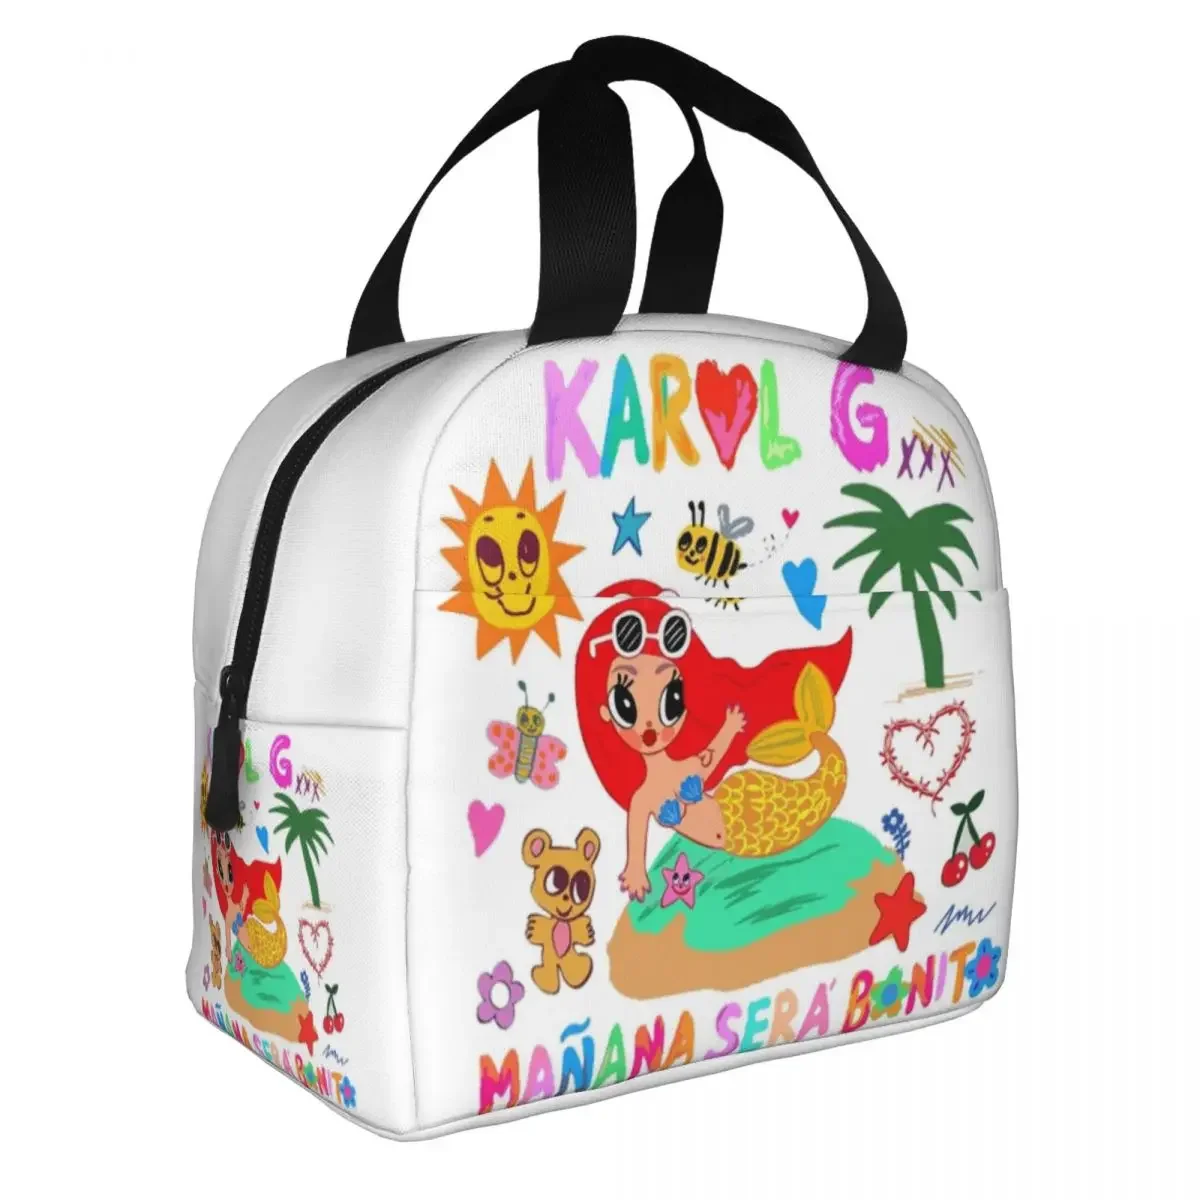 

Manana Sera Bonito Inspired Karol G Insulated Lunch Bag Cooler Bag Lunch Container Leakproof Lunch Box Men Women Beach Travel